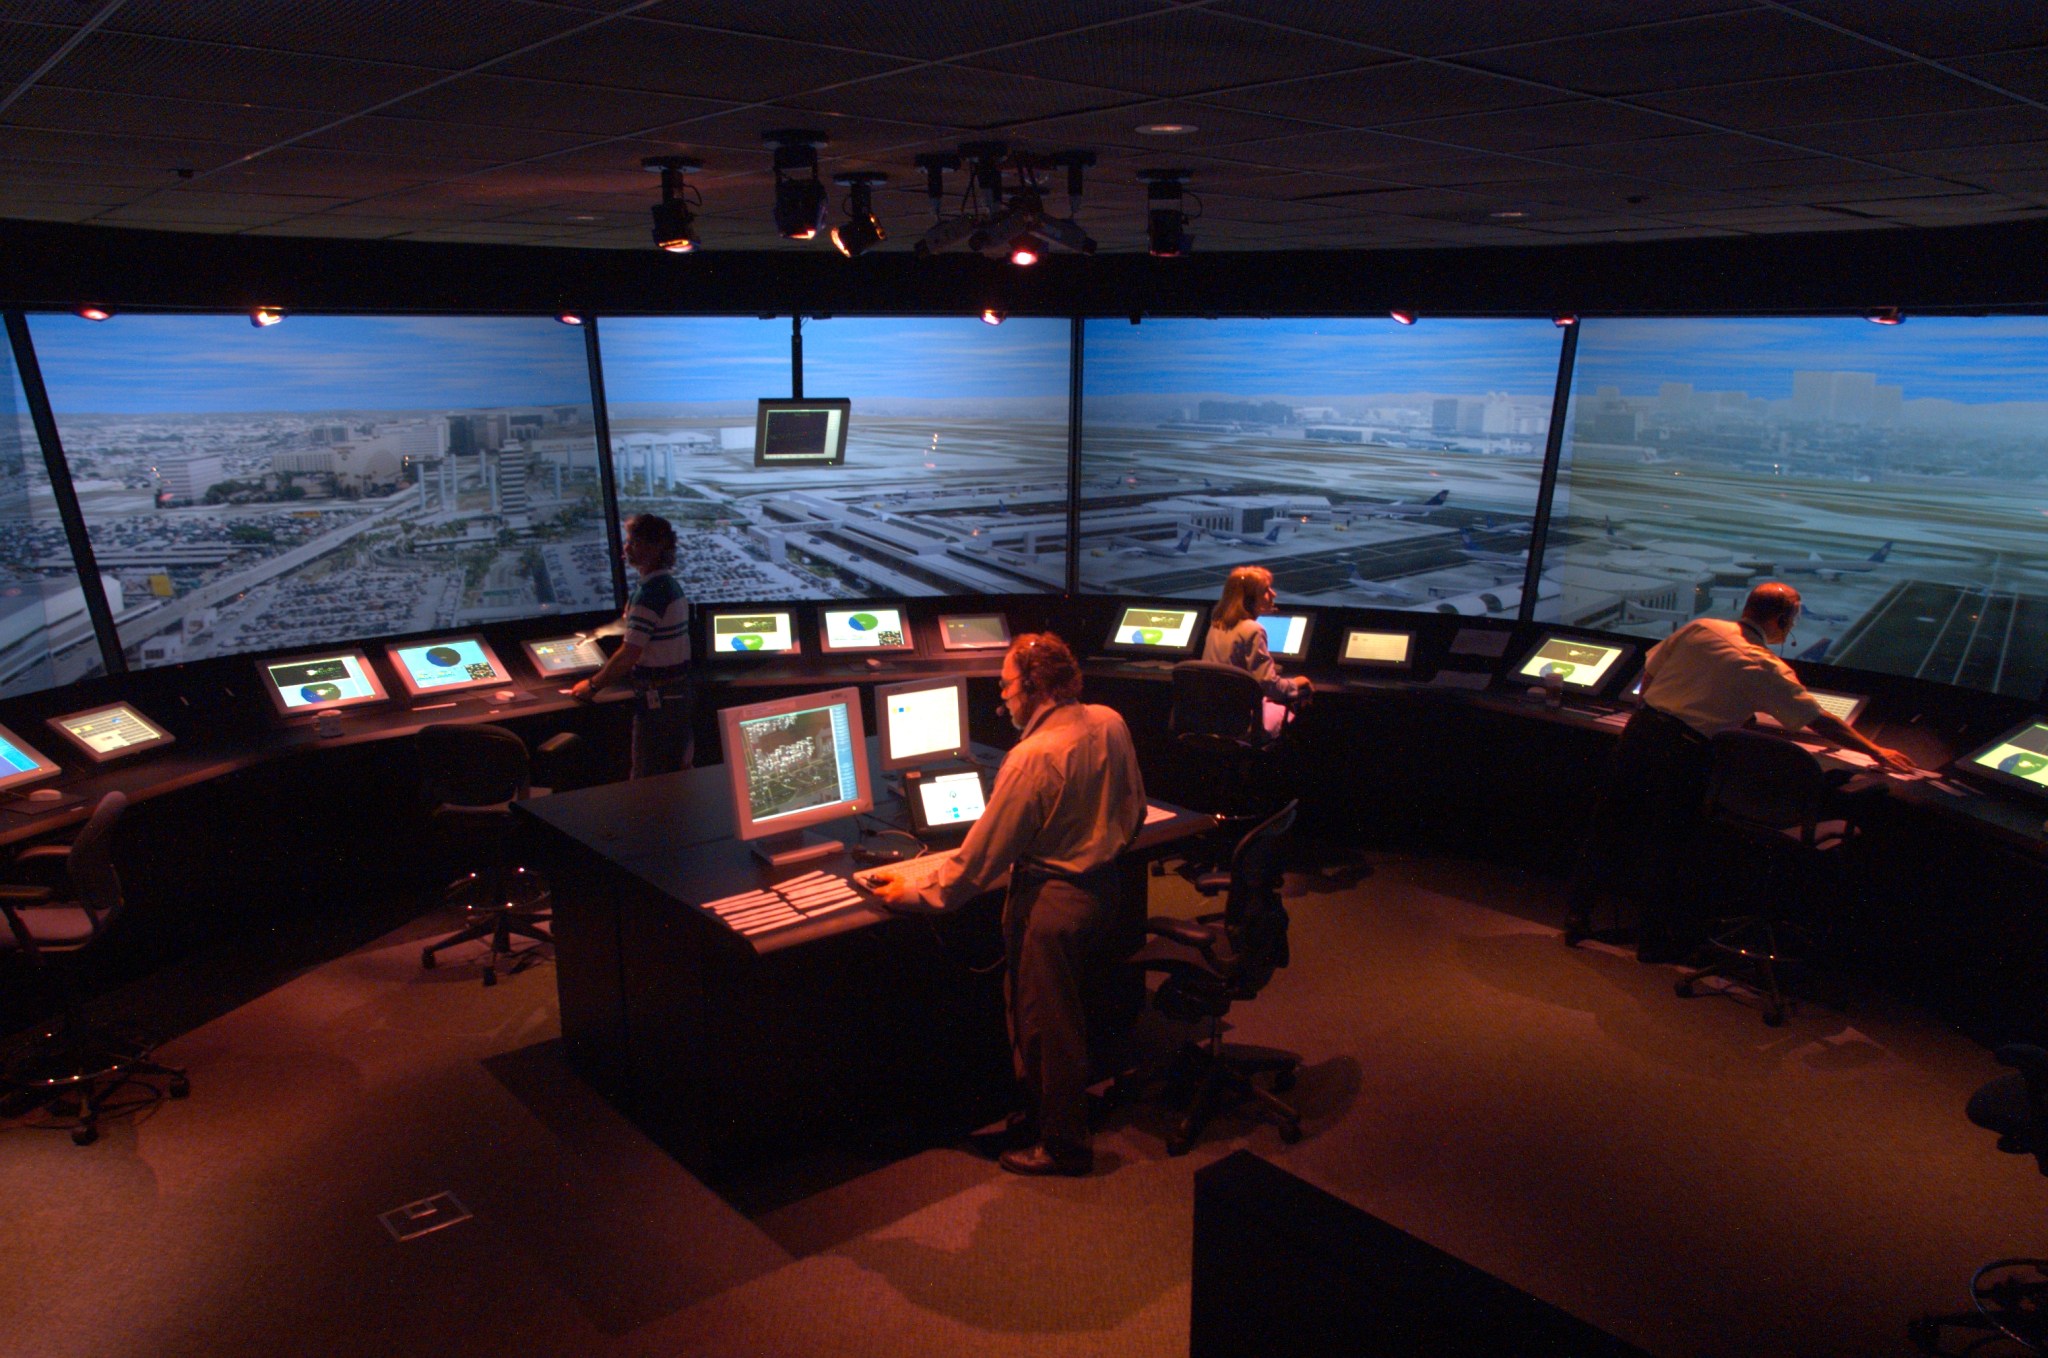 A simulator of an air traffic control tower, with large monitors showing an airport and cityscape in the background.